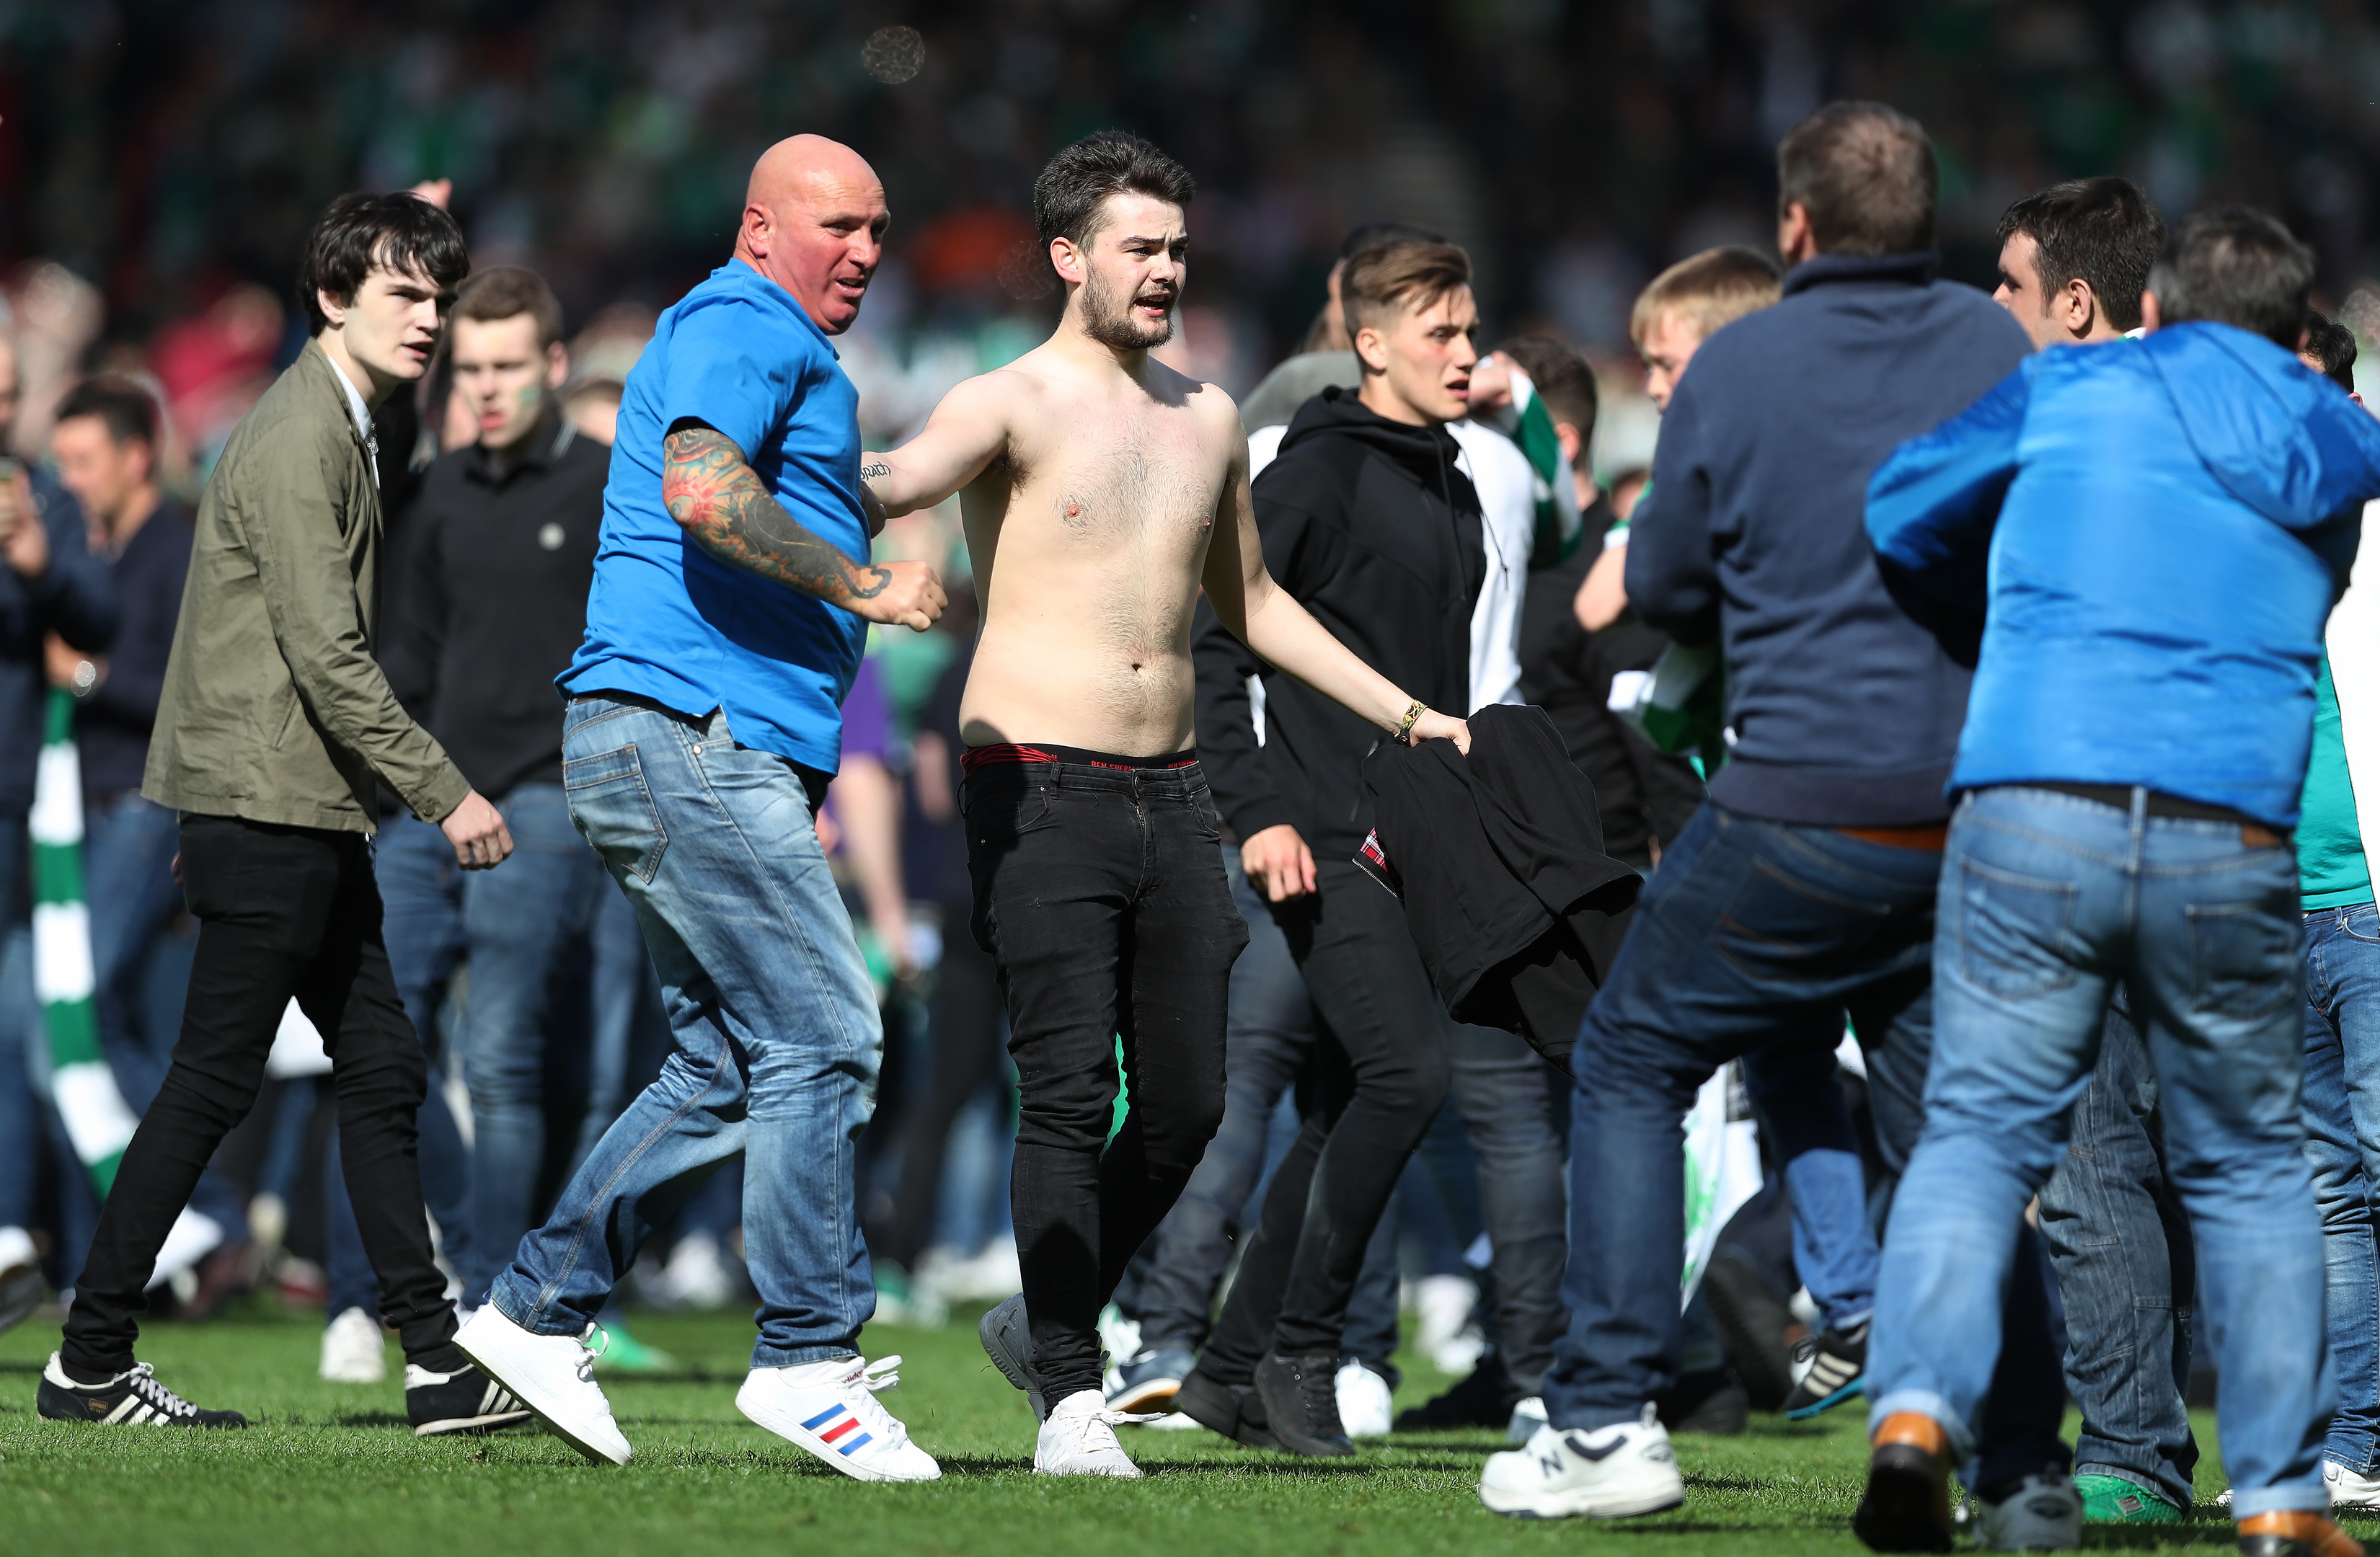 Rangers and Hibs fans confront each other during the Scottish Cup Final between Rangers and Hibernian at Hampden Park in May (Photo by Ian MacNicol/Getty)